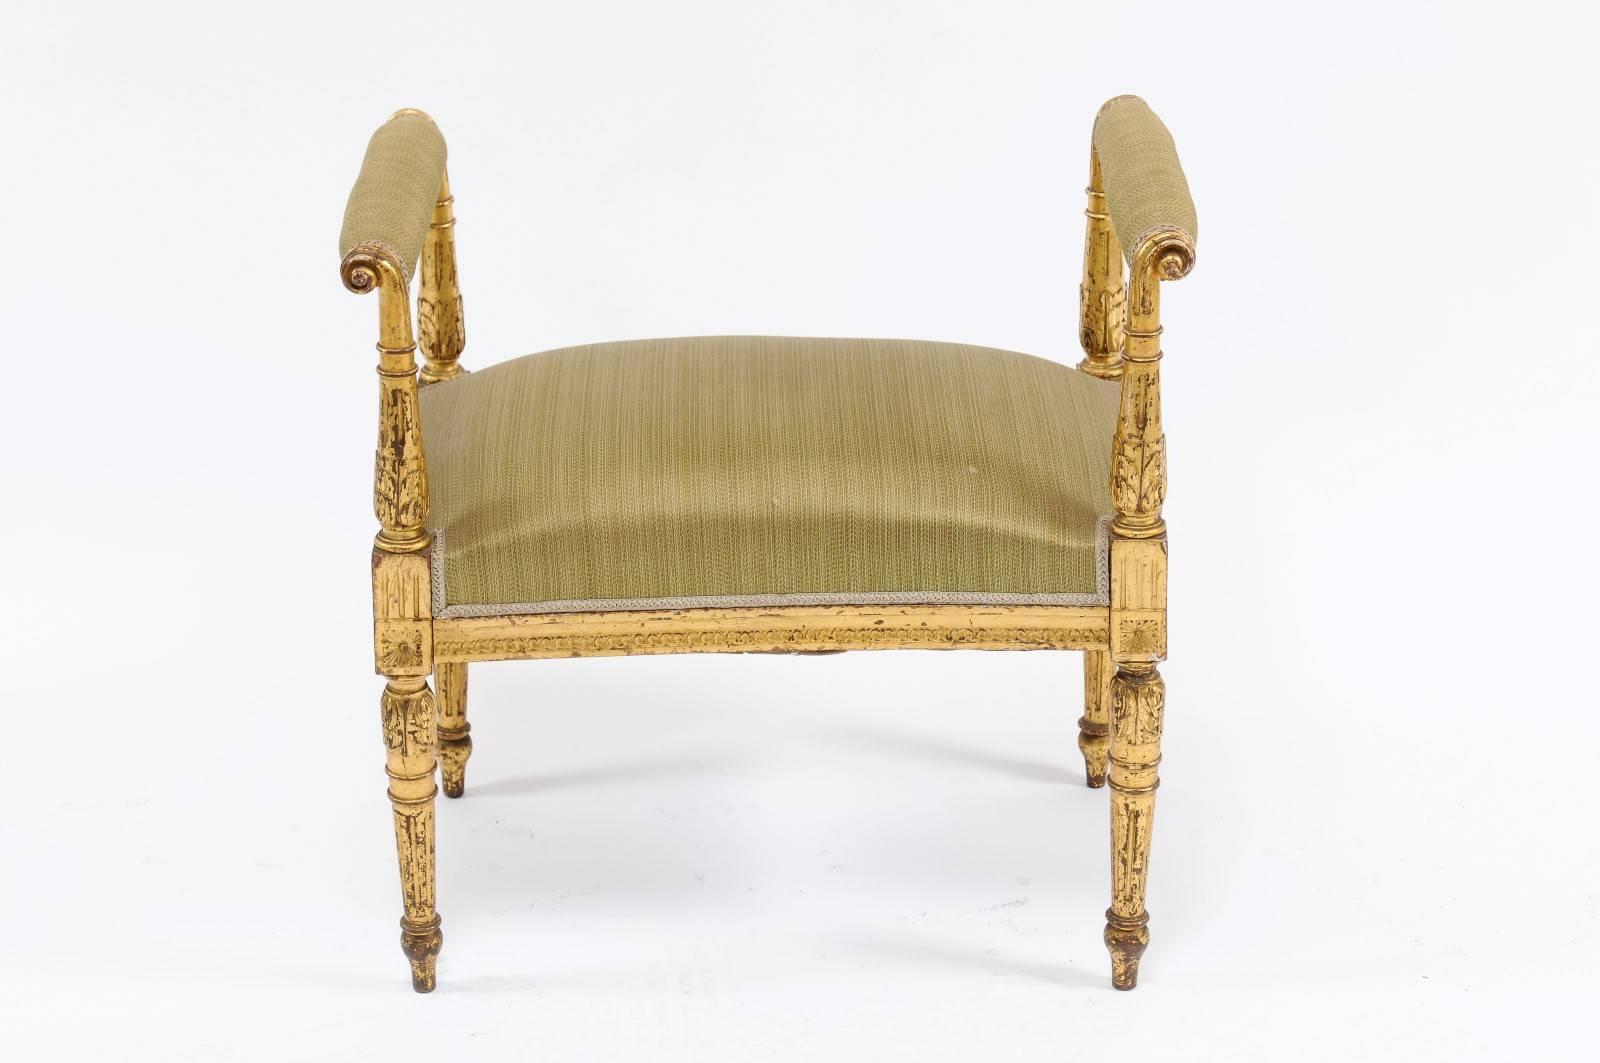 French Giltwood Louis XVI Style Upholstered Bench with Out-Scrolled Arms 1